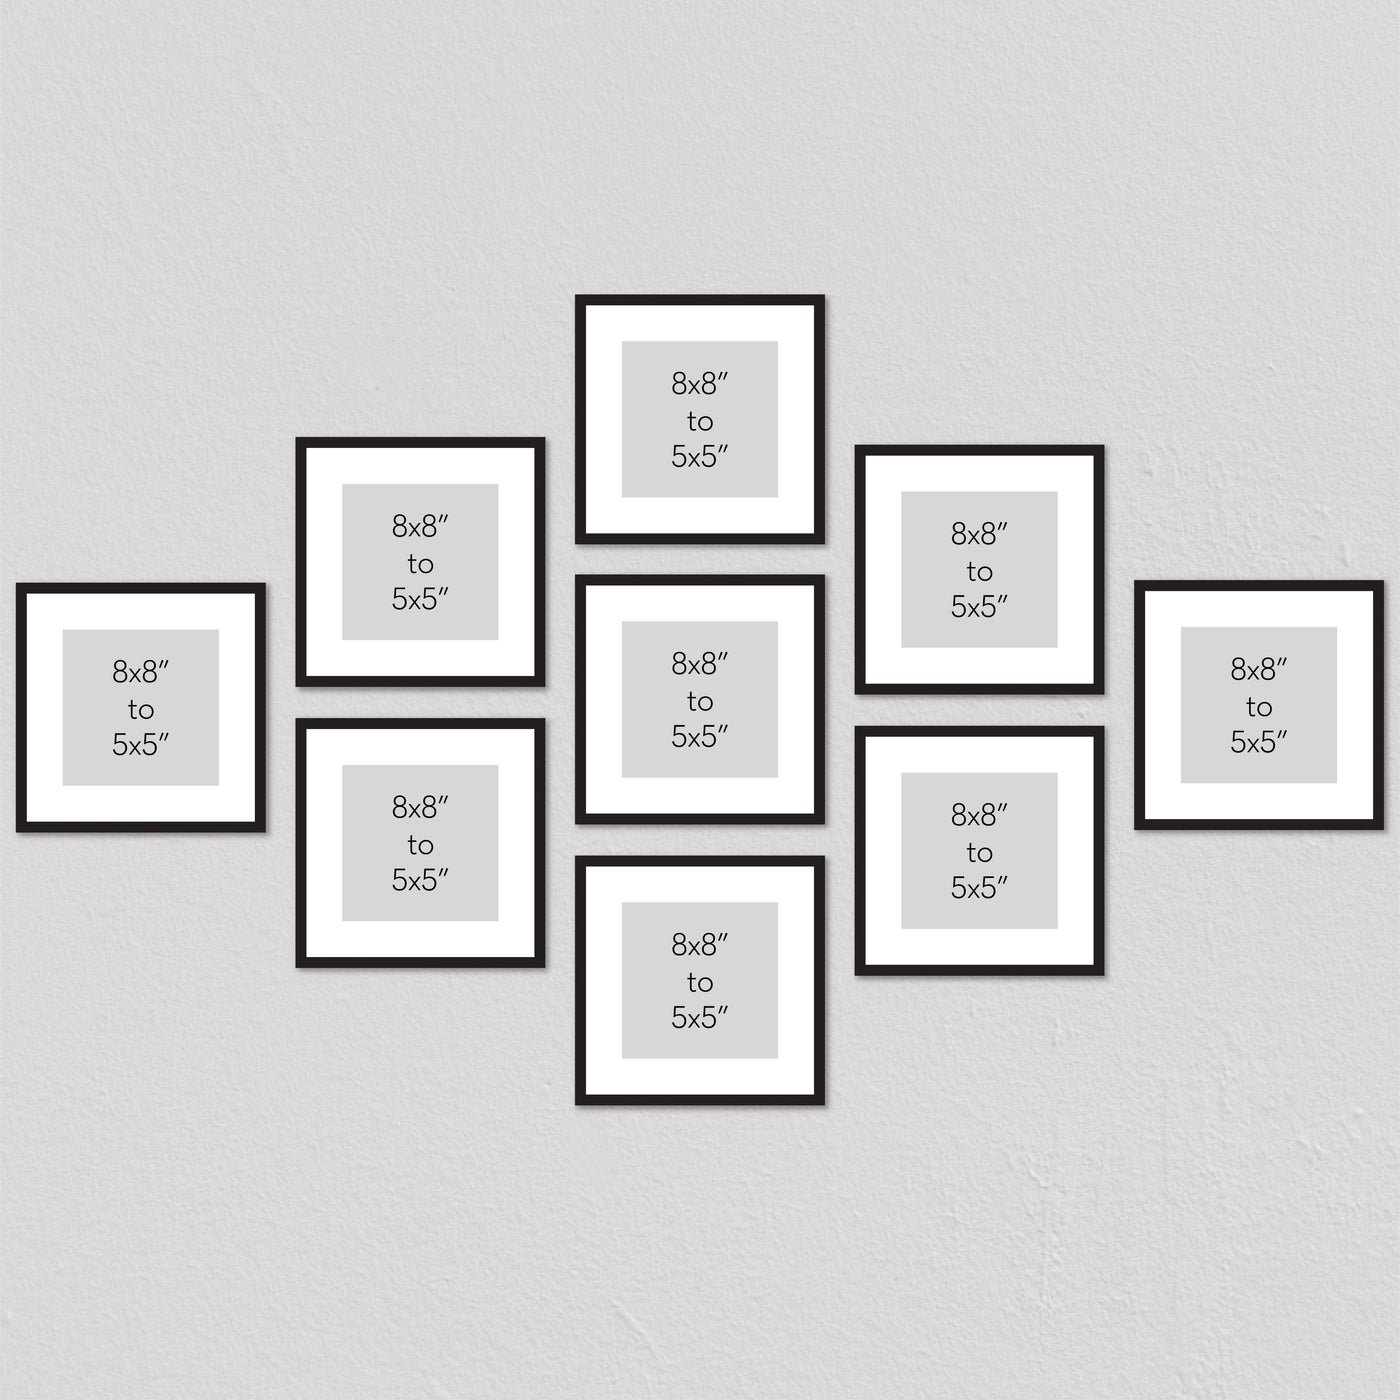 Studio Nova Gallery Photo Wall Square Frame Set (9 Piece) from our Studio Nova Gallery Photo Wall Frame Sets collection by Profile Products Australia